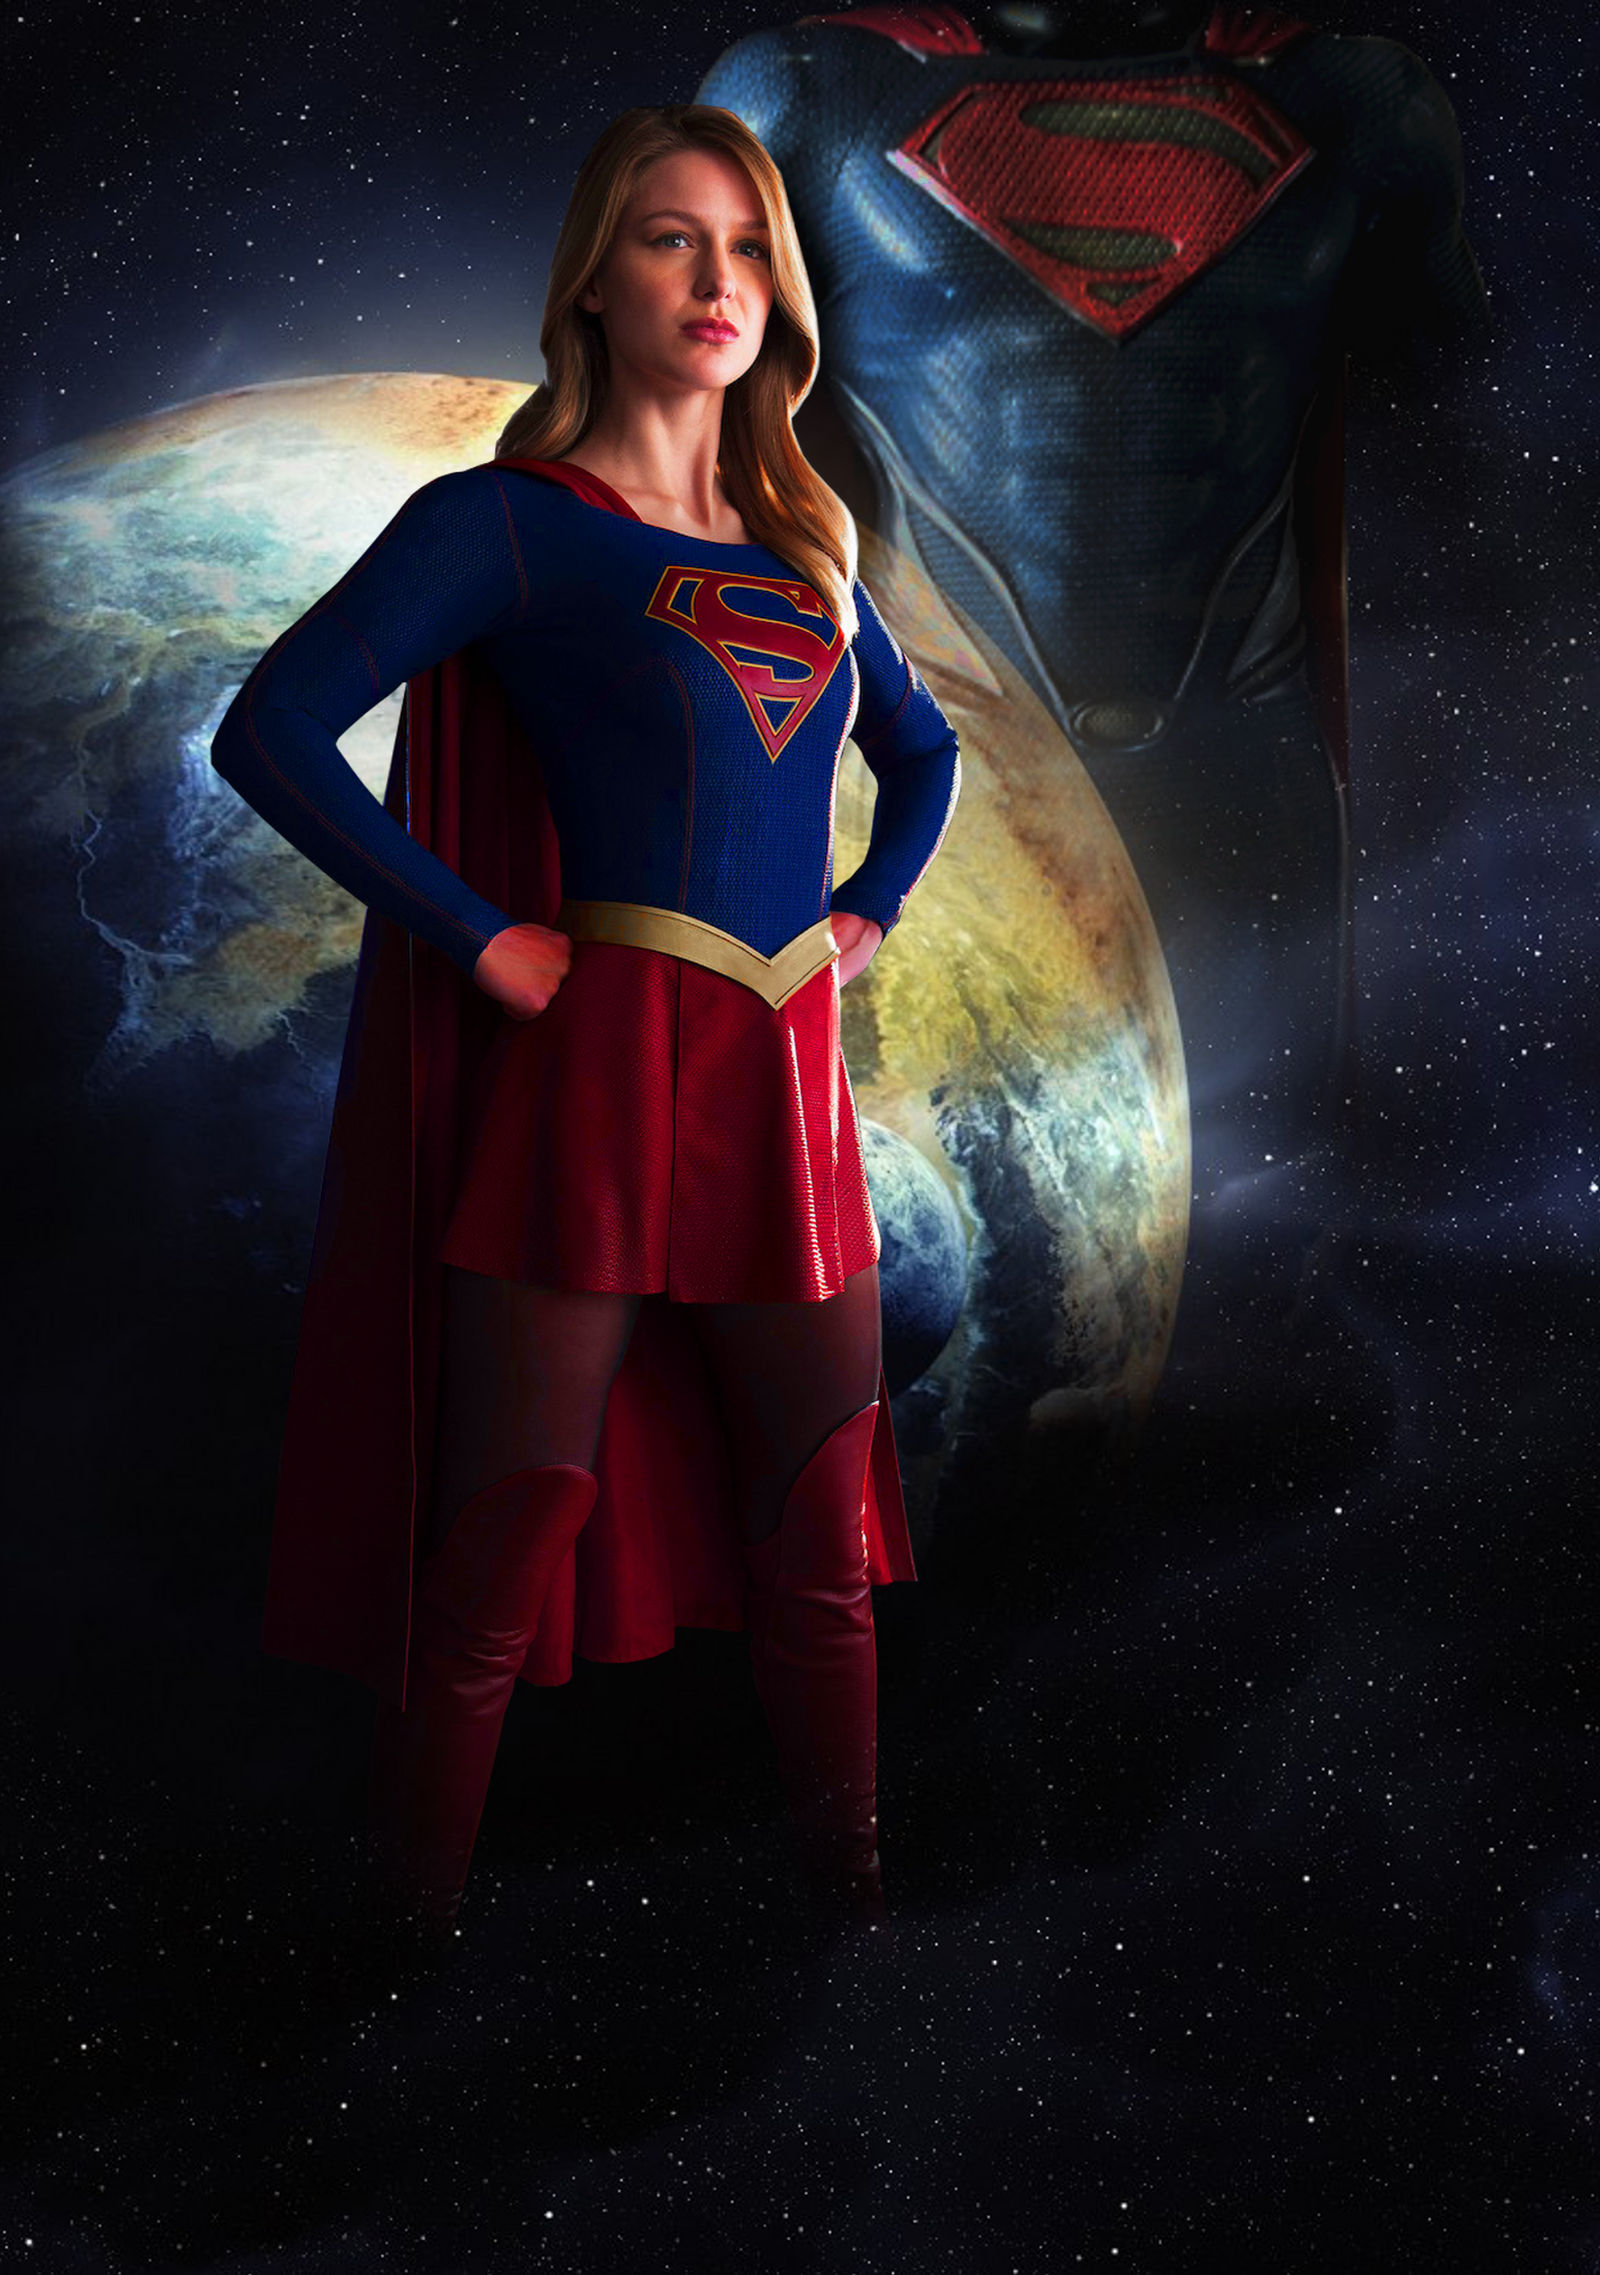 Supergirl Wallpapers